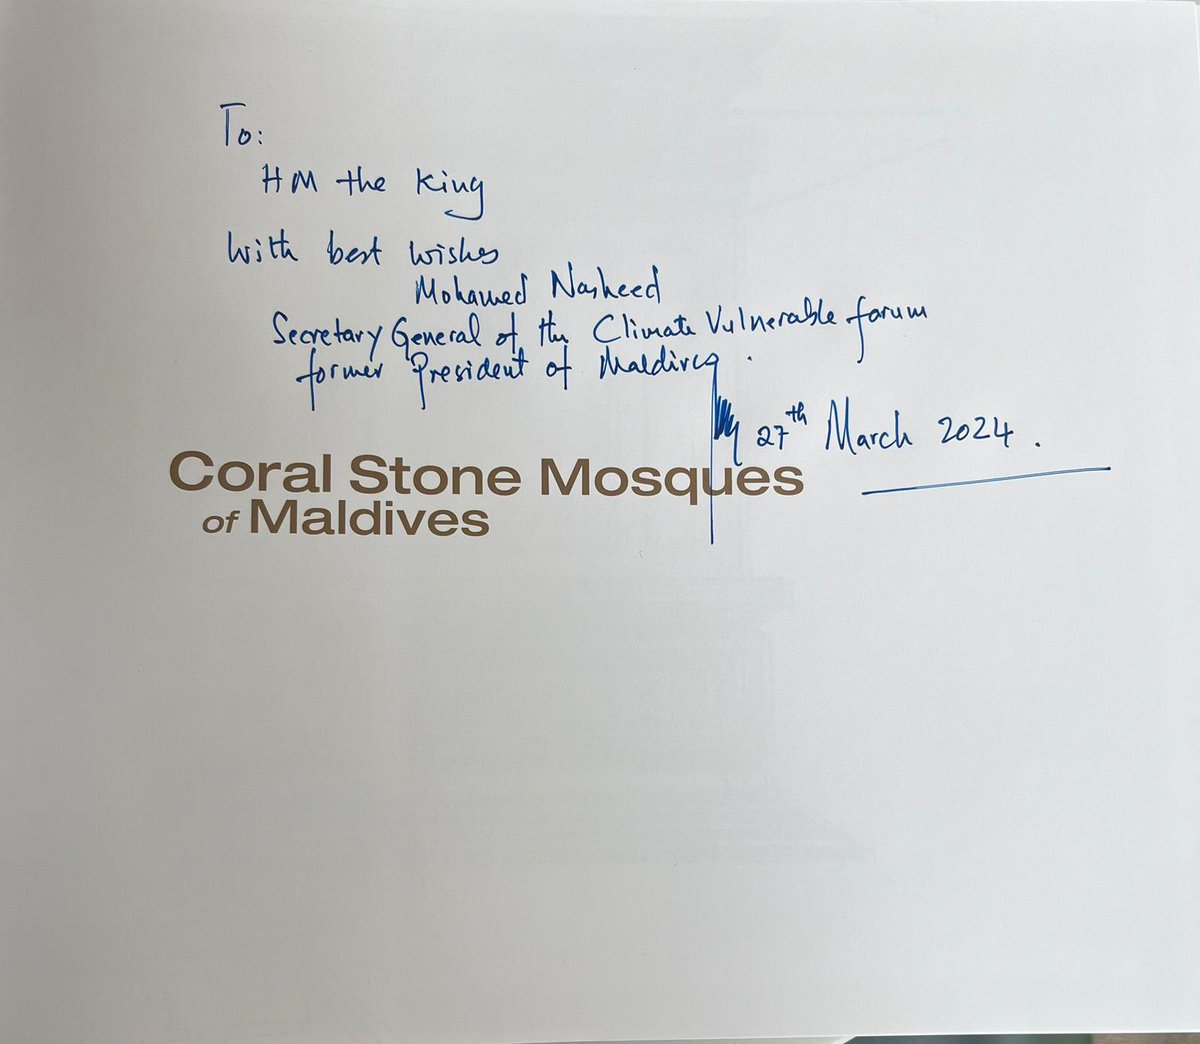 I conveyed to His Majesty best wishes, on behalf of all @TheCVF countries, the people of Maldives, as well as from my own family. I presented HM with this lovely book about the historic coral stone mosques of the Maldives.